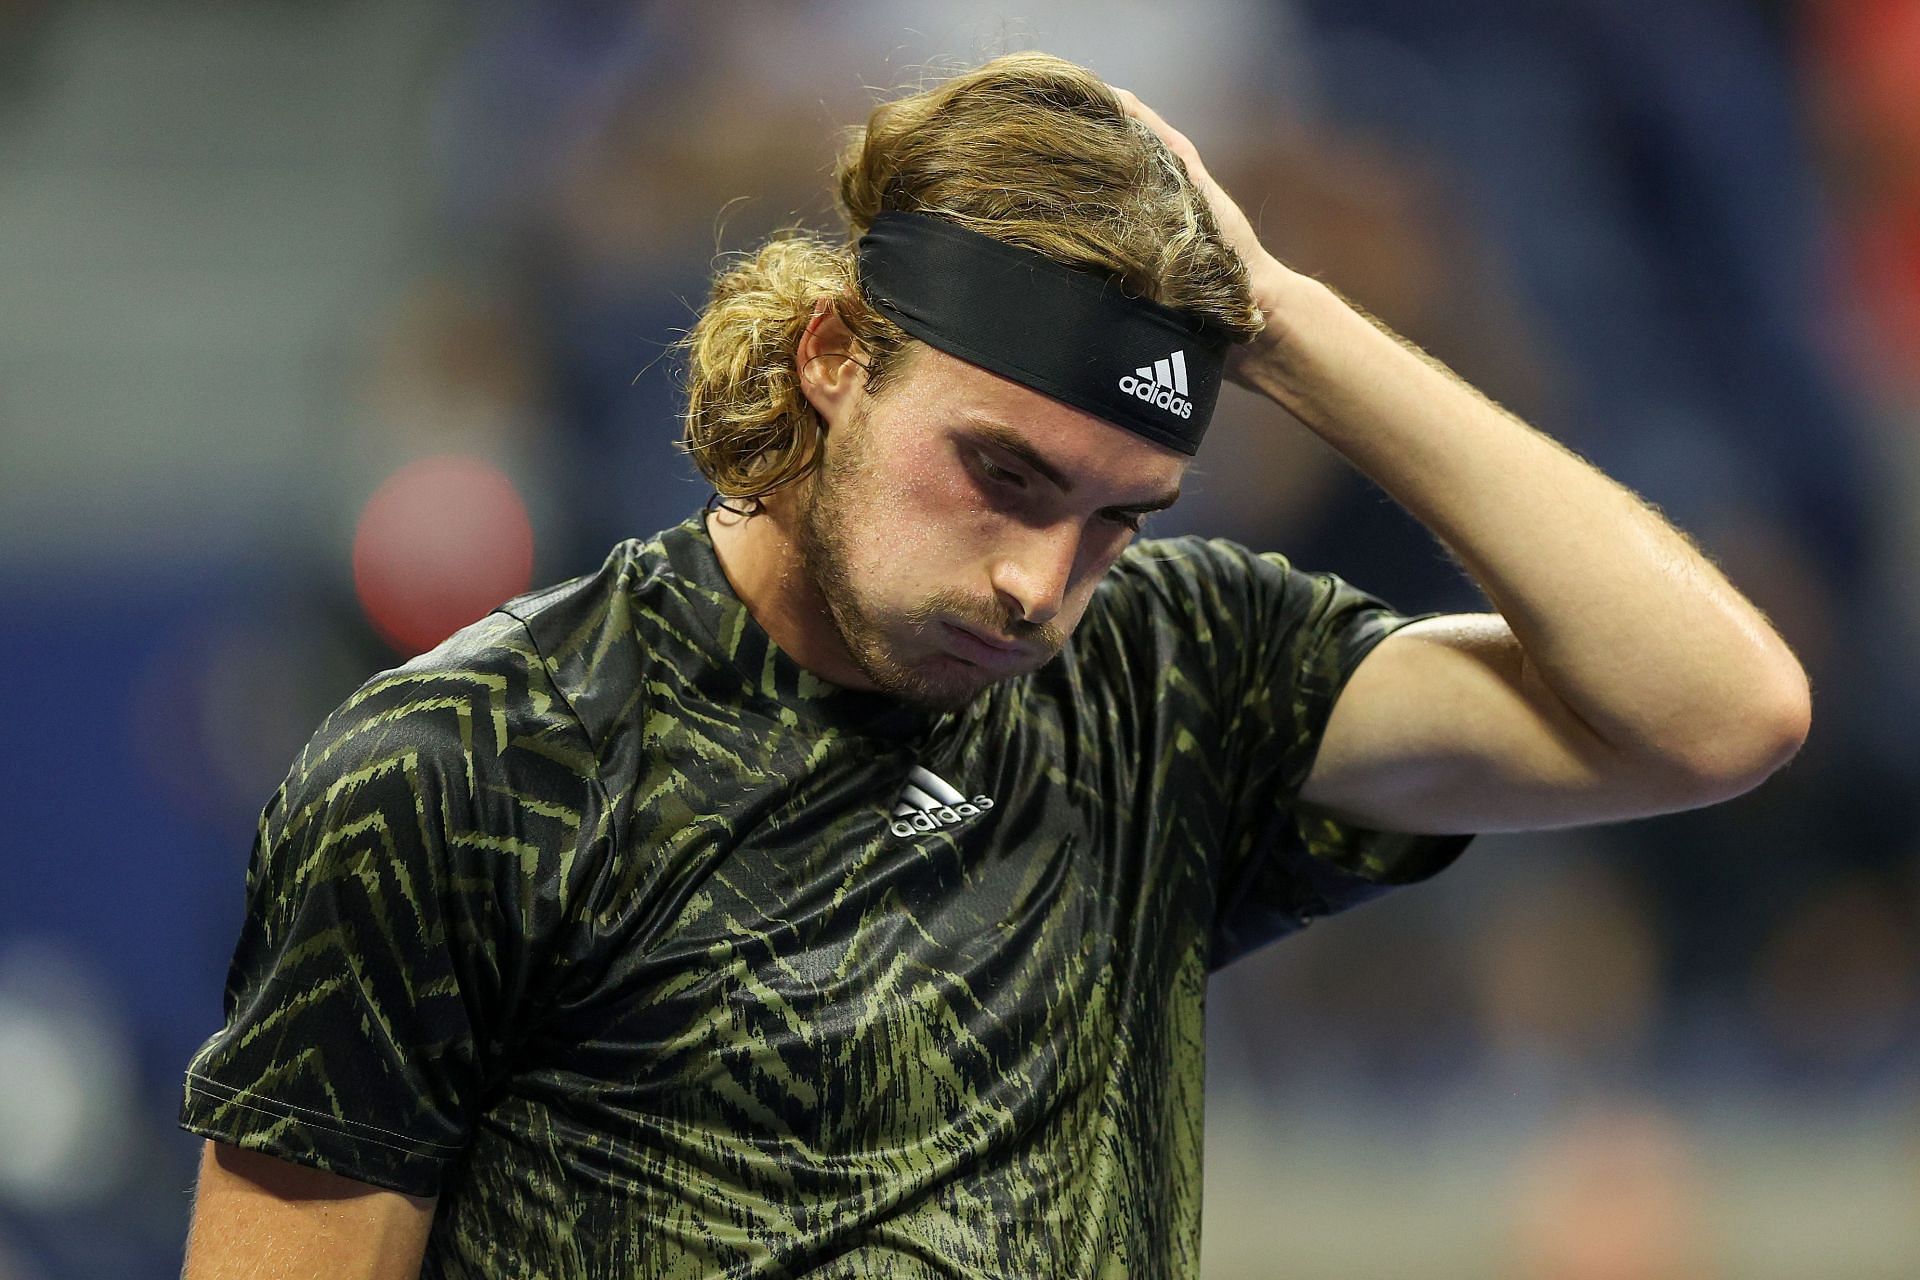 Stefanos Tsitsipas was at the center of bathroom break controversy at the US Open 2021